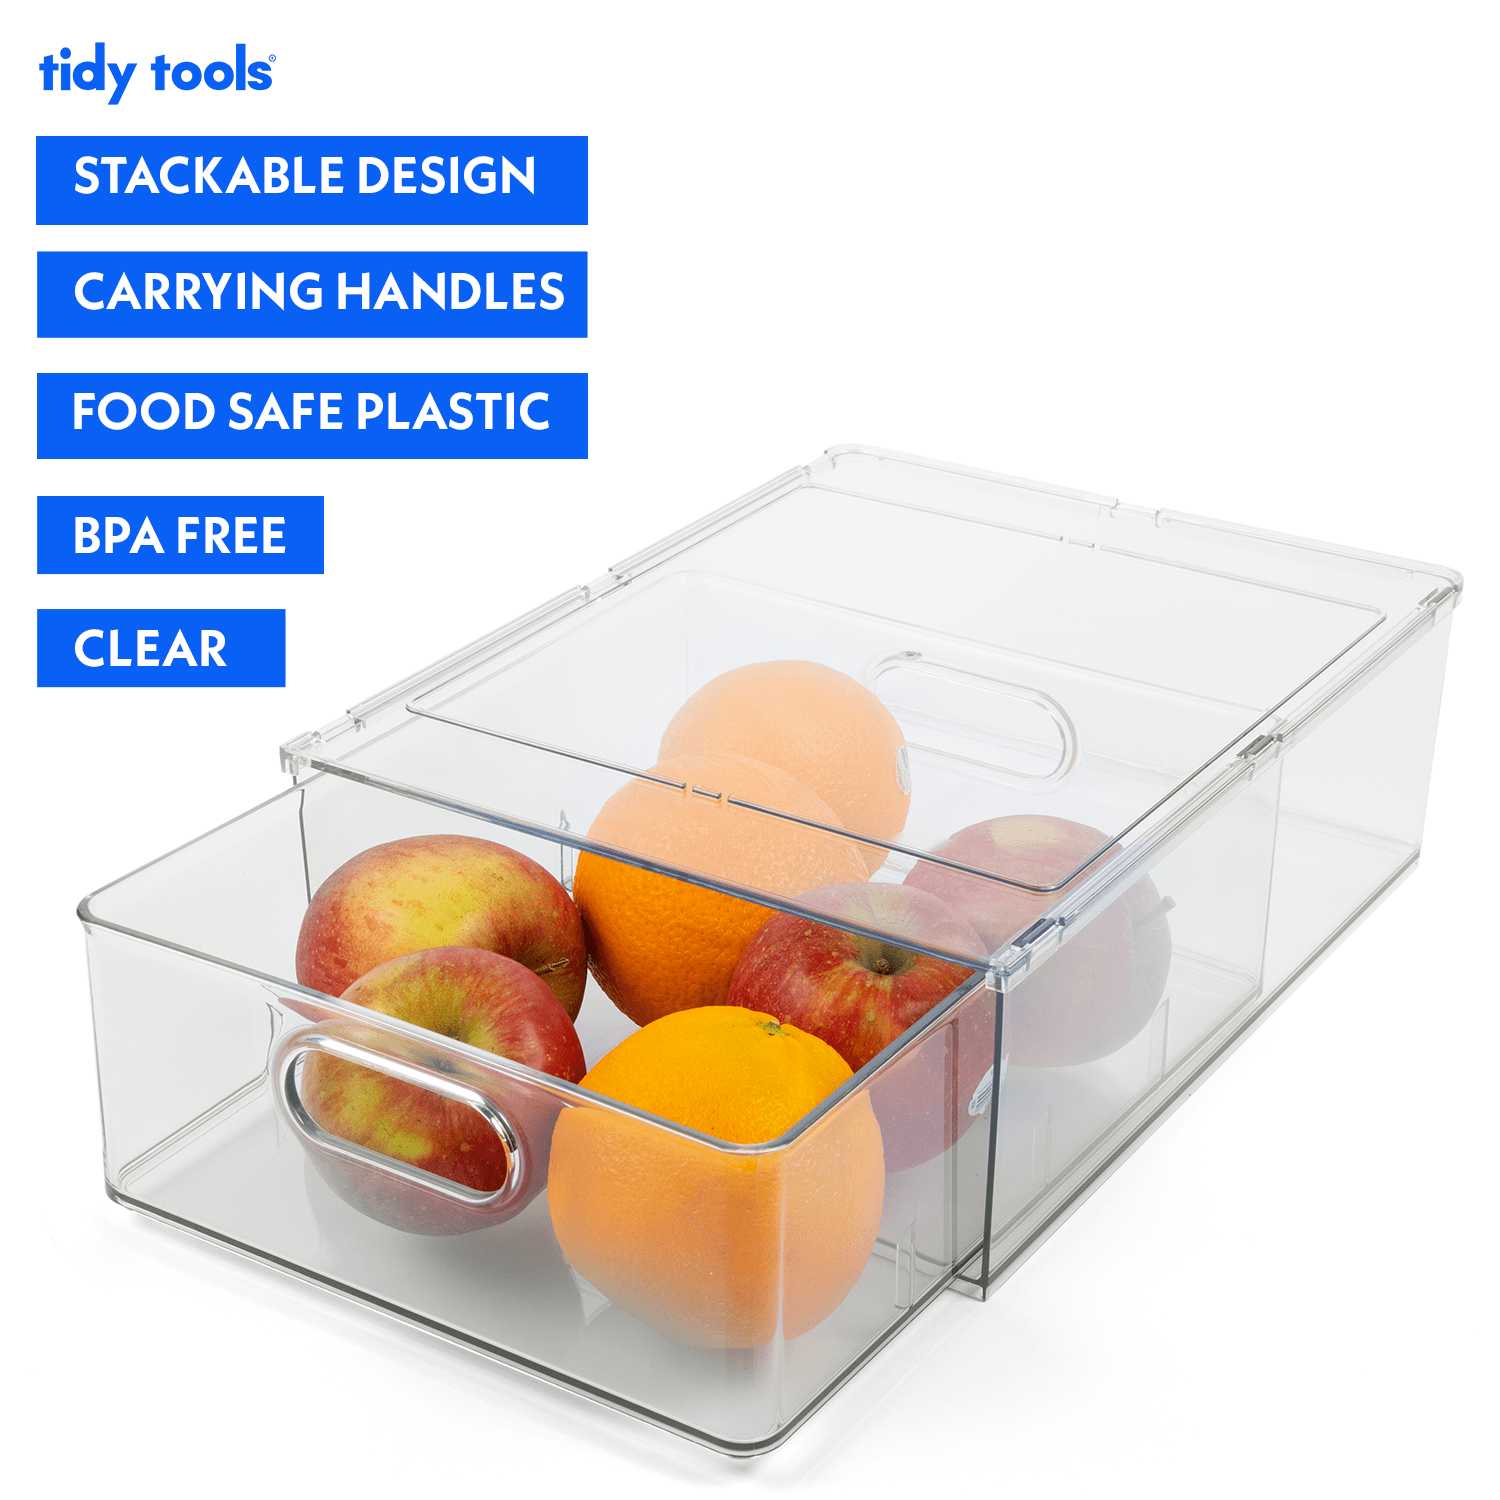 Tidy Tools Clear Organizer Bins with Pull-out Drawers, Stackable Organizer with Handles